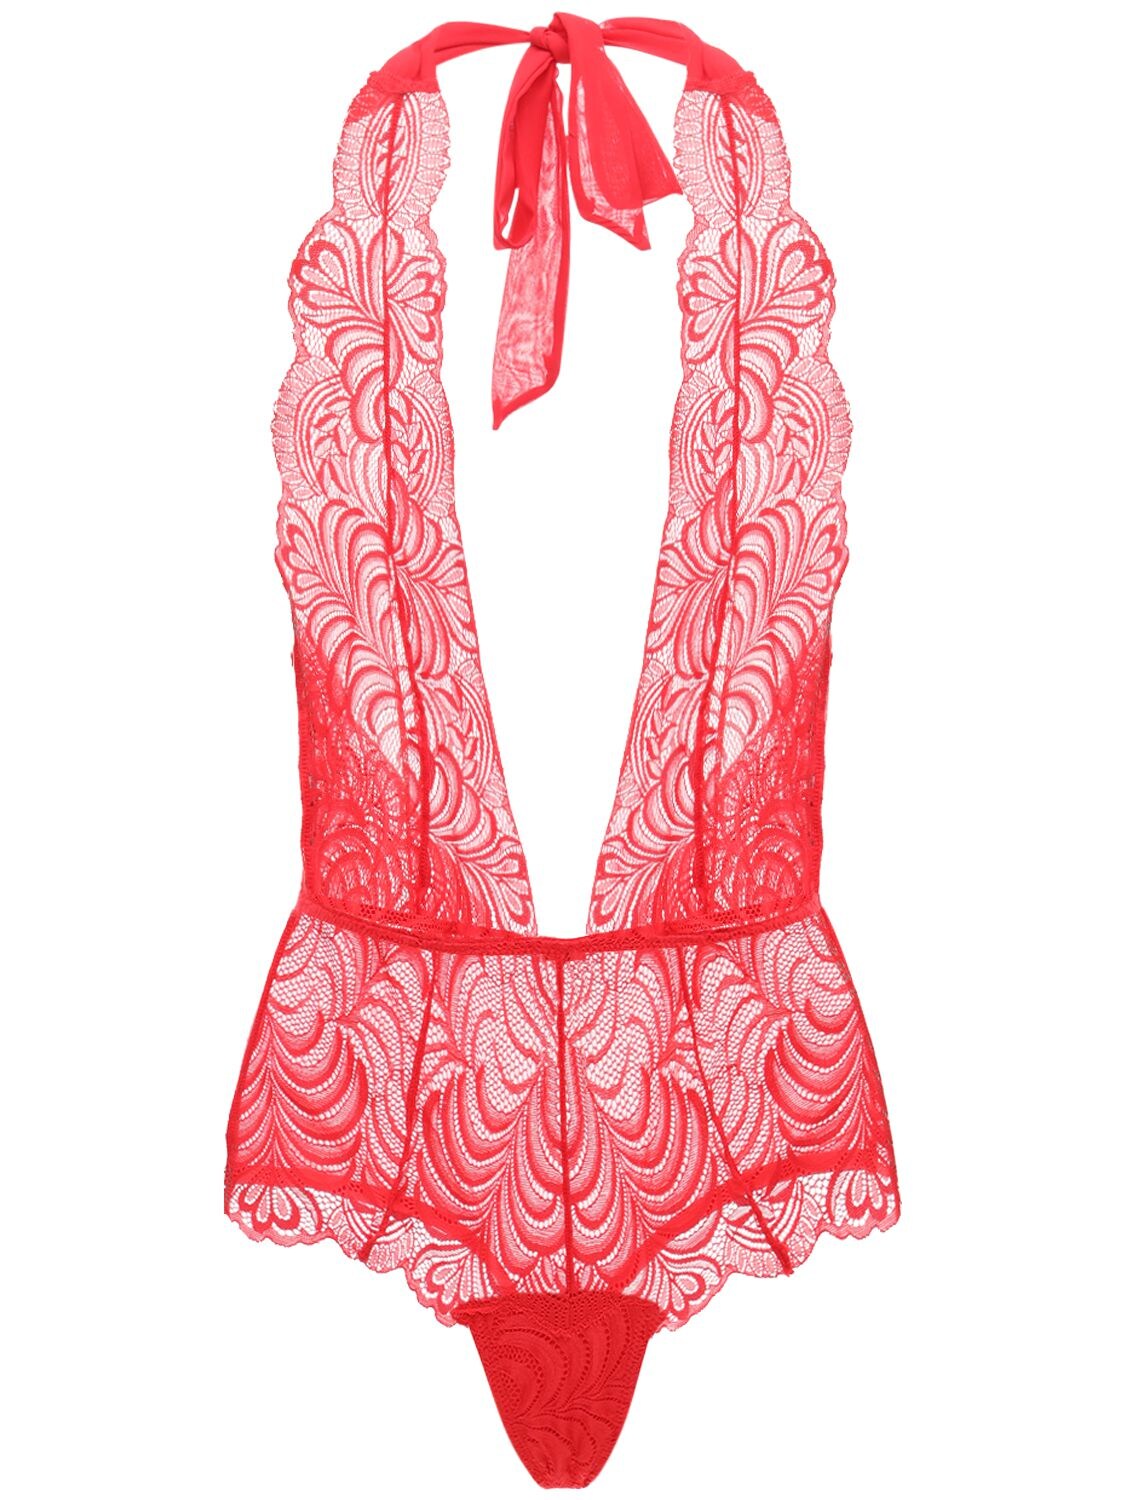 Bluebella Genevieve Lace Bodysuit In Red